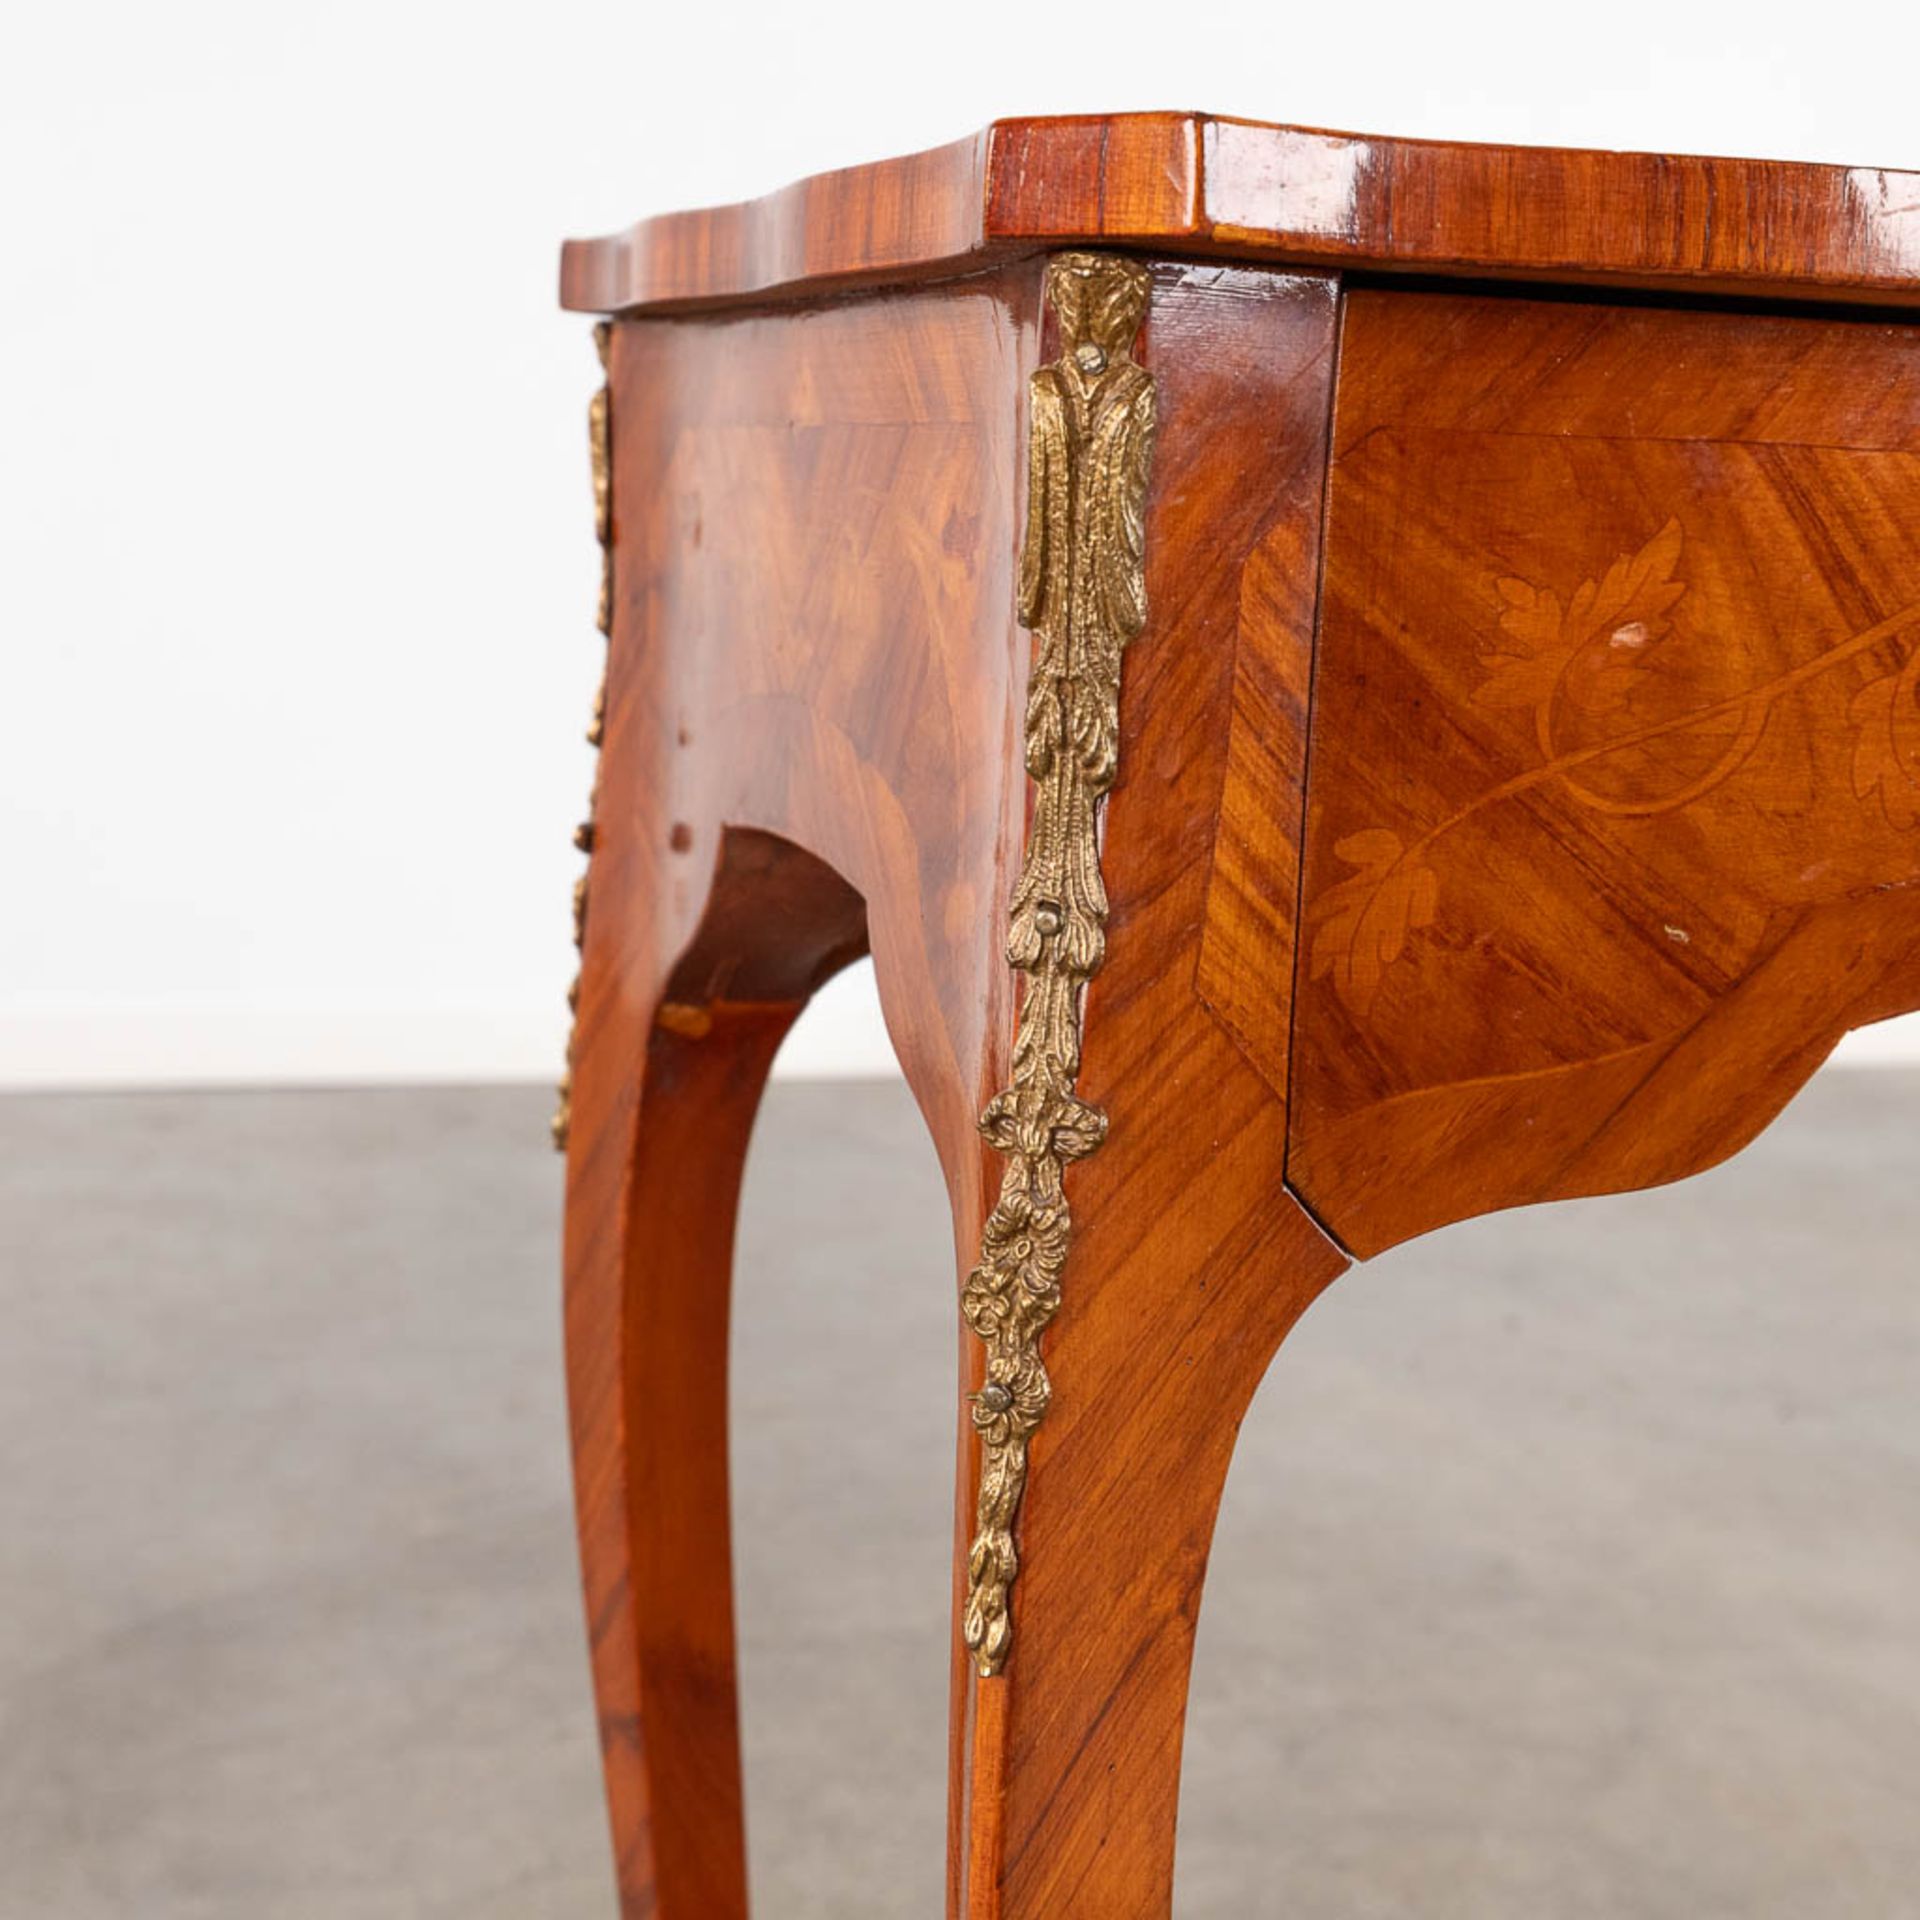 A pair of two-tier side tables with a drawer, wood with marquetry inlay. 20th C. (D:30 x W:45 x H:63 - Image 11 of 14